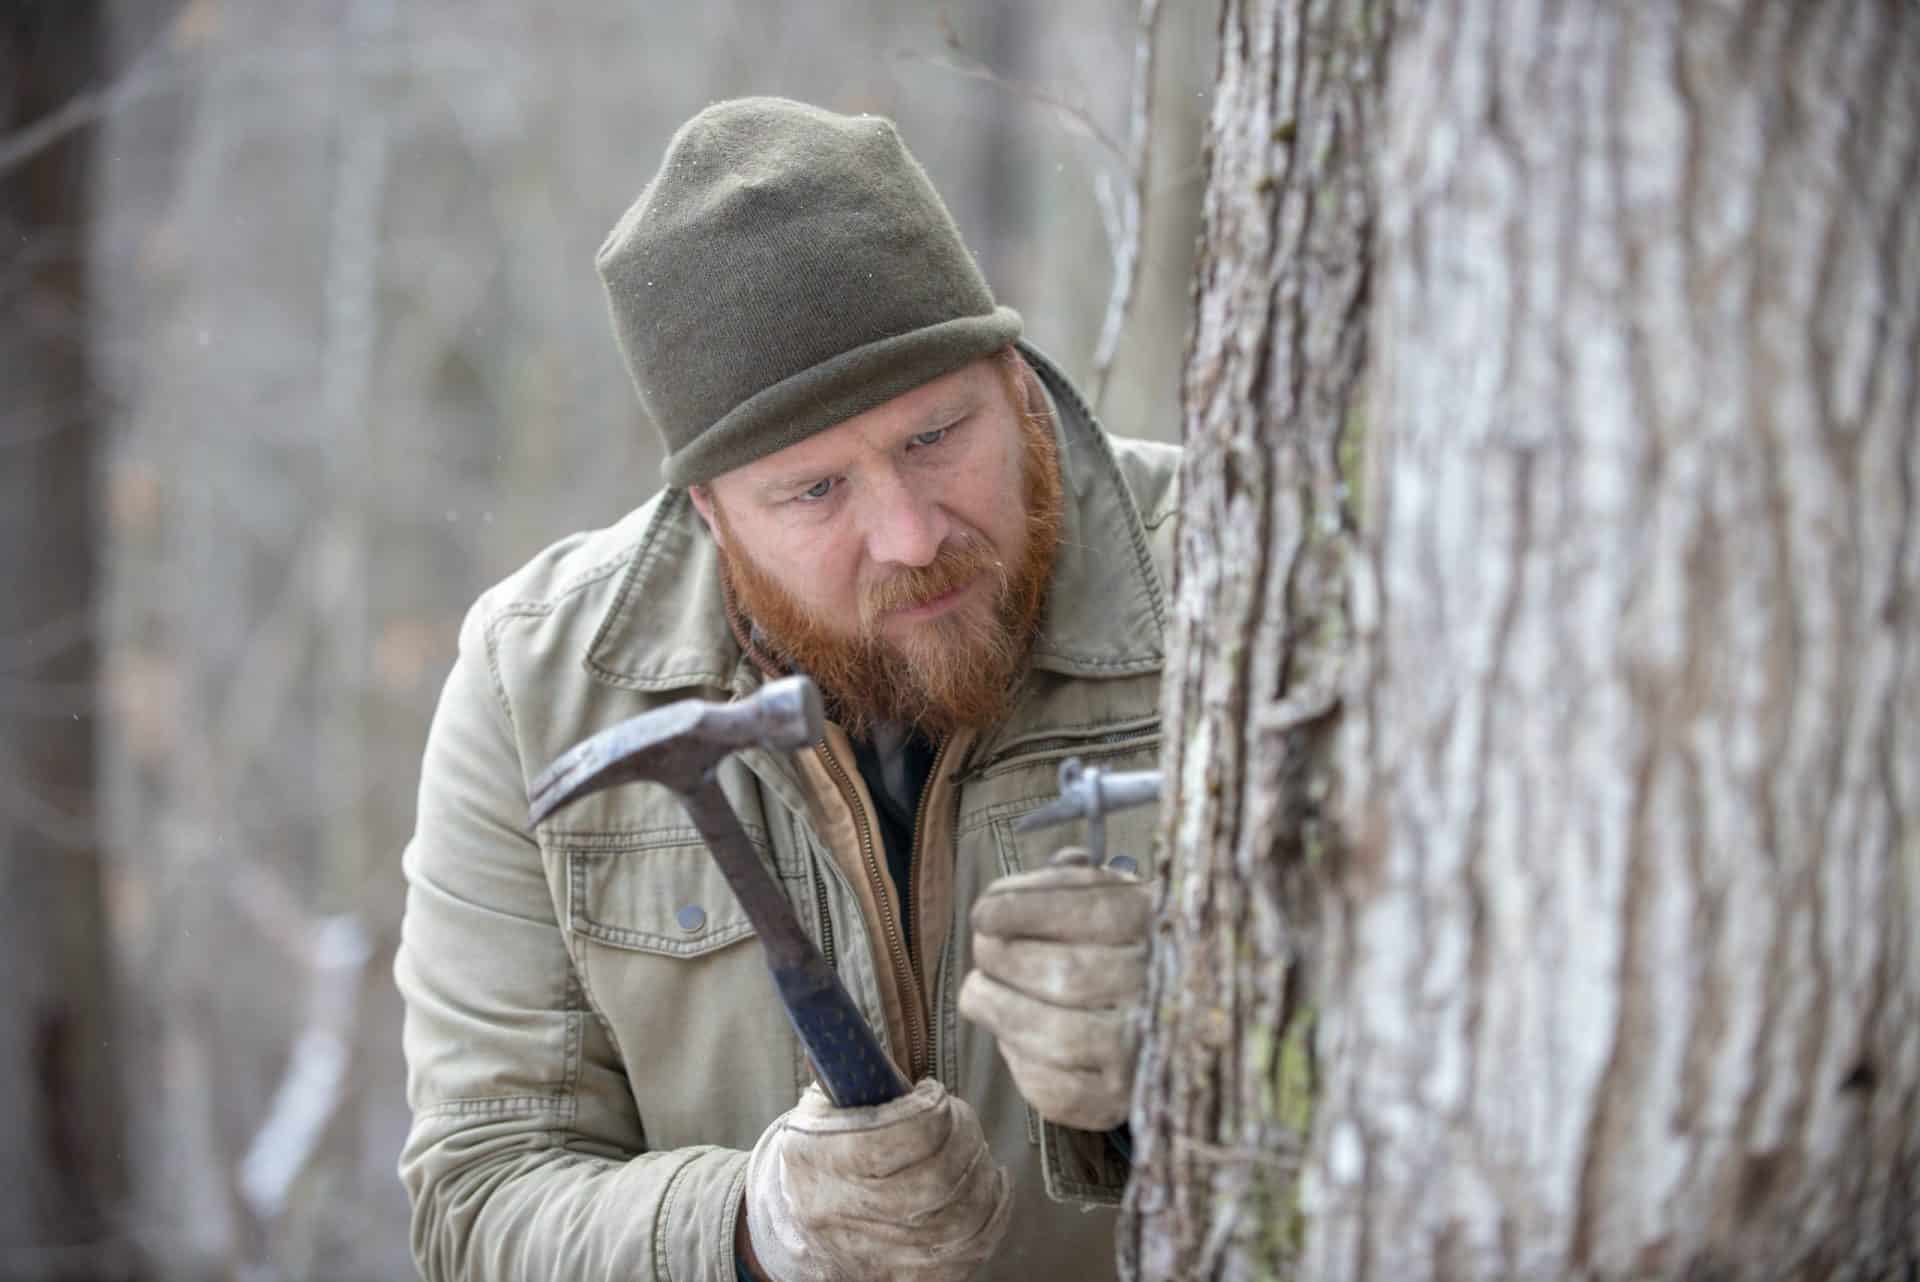 DIY Maple Syrup: How to Tap